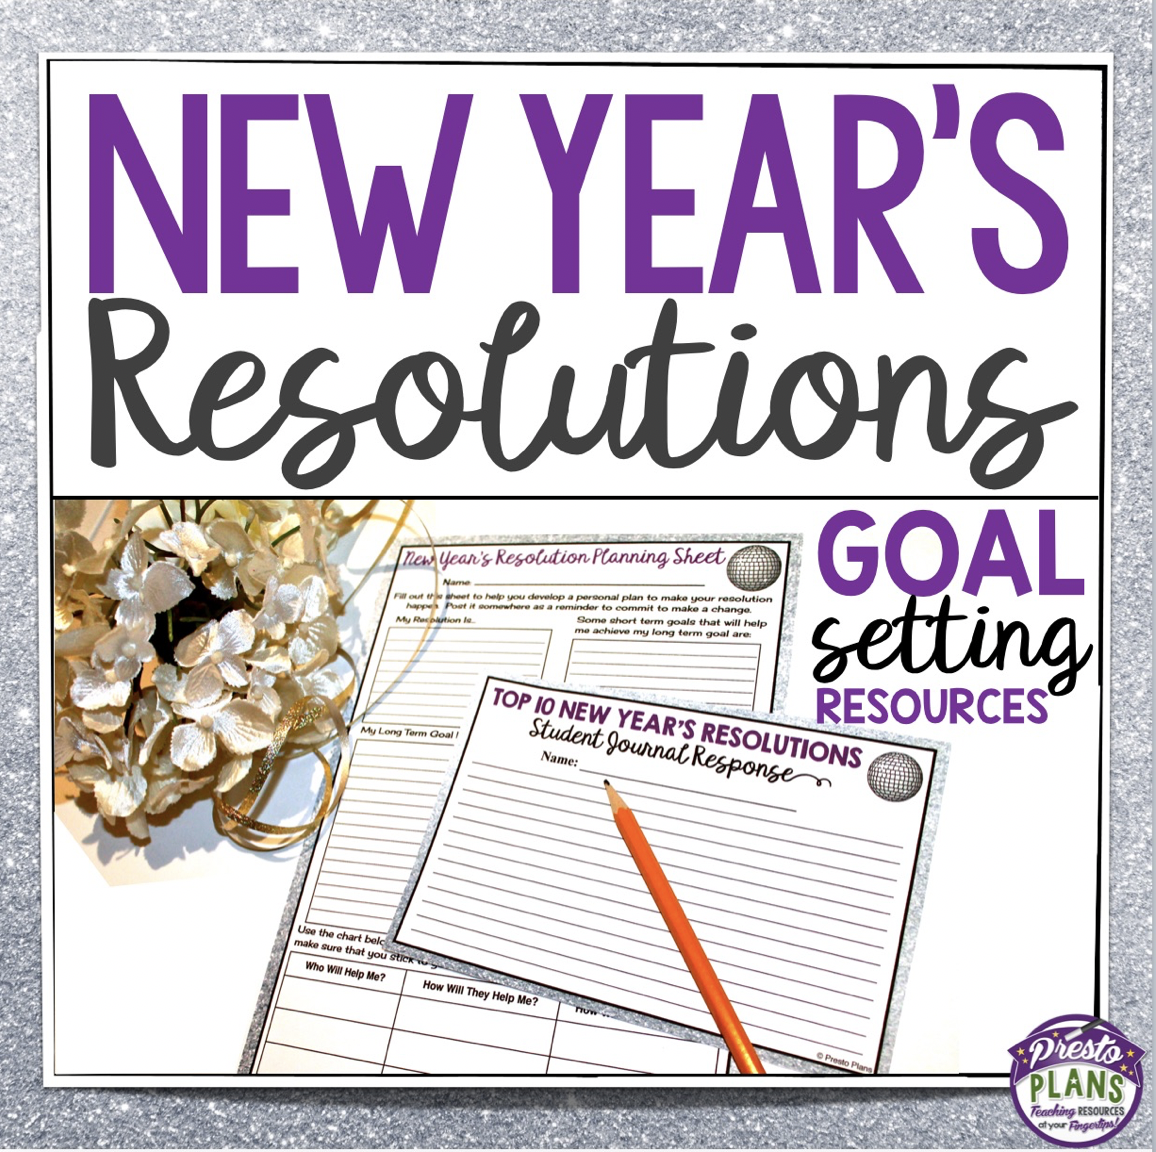 What are the New year Resolutions. New year goals. What's your New year Resolution. Smart goals New year. New years resolutions is